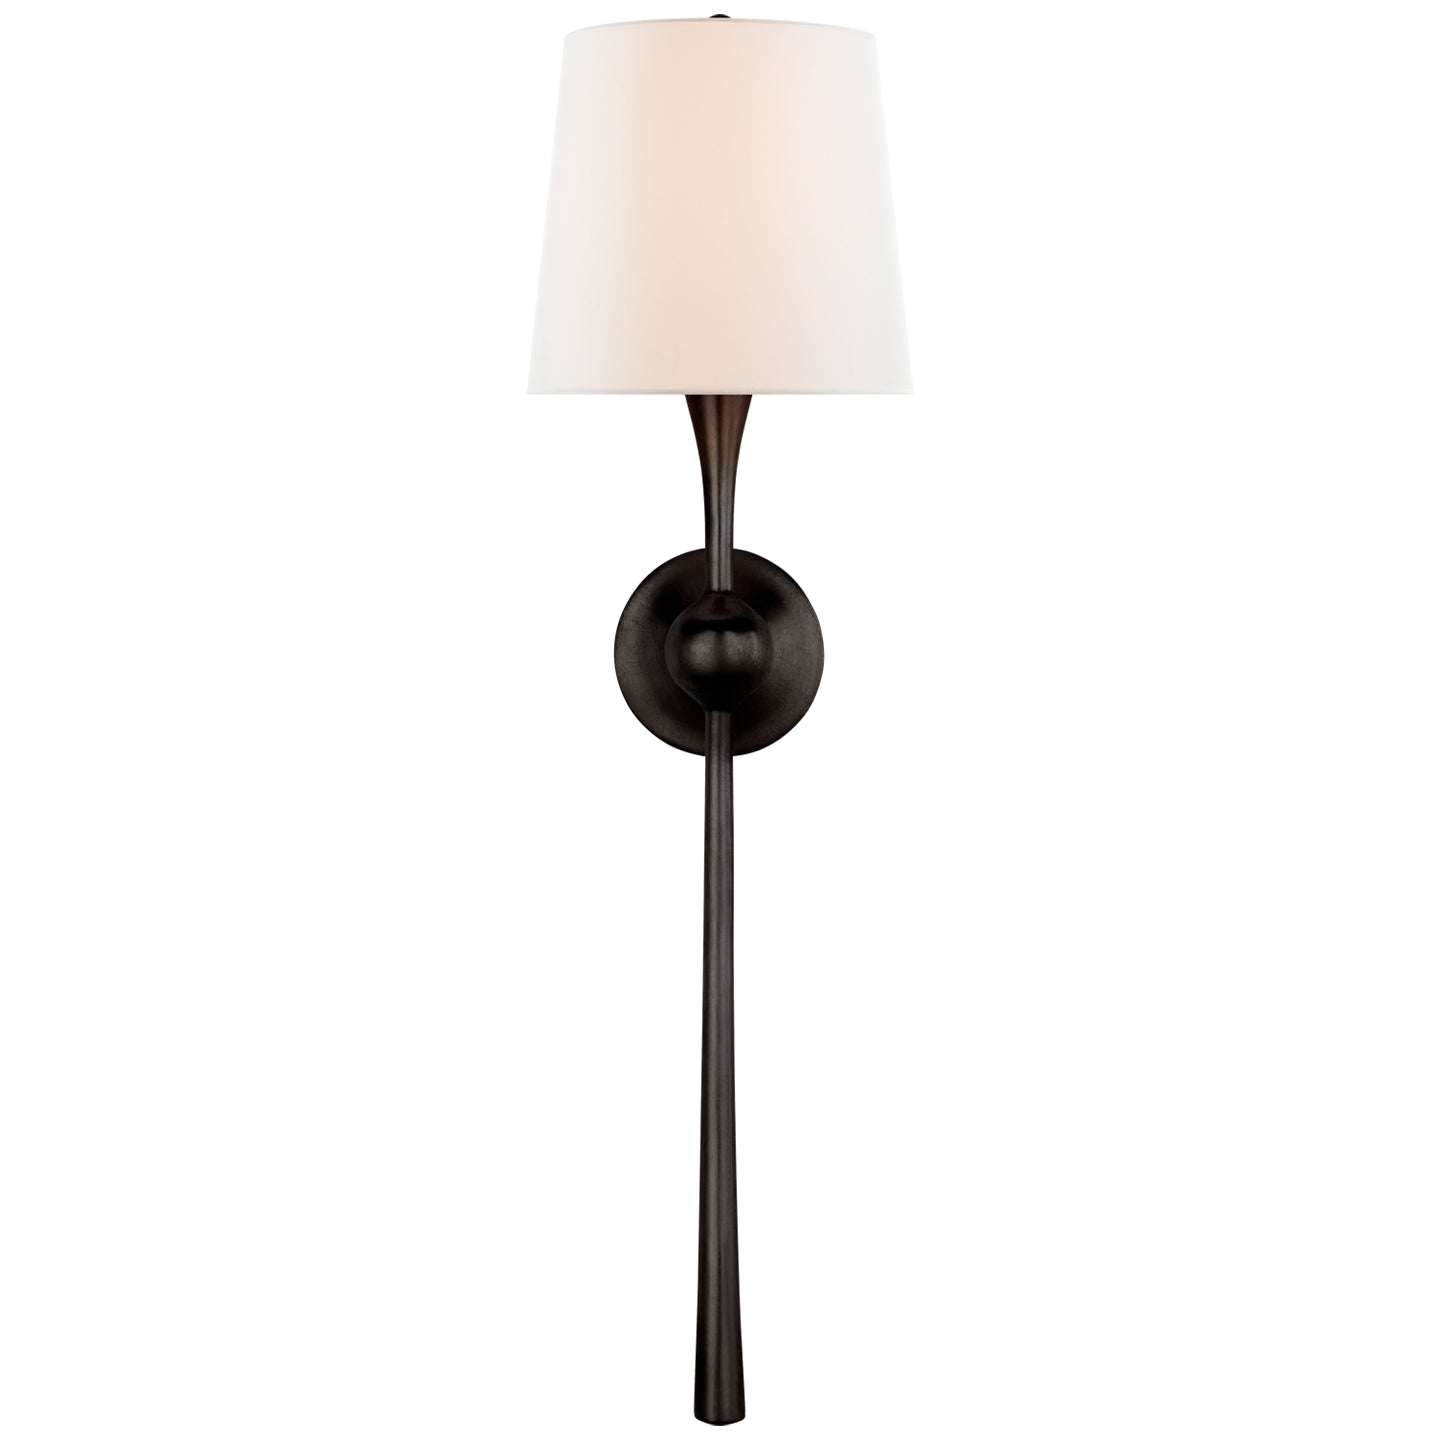 Visual Comfort Signature - ARN 2302AI-L - One Light Wall Sconce - Dover - Aged Iron